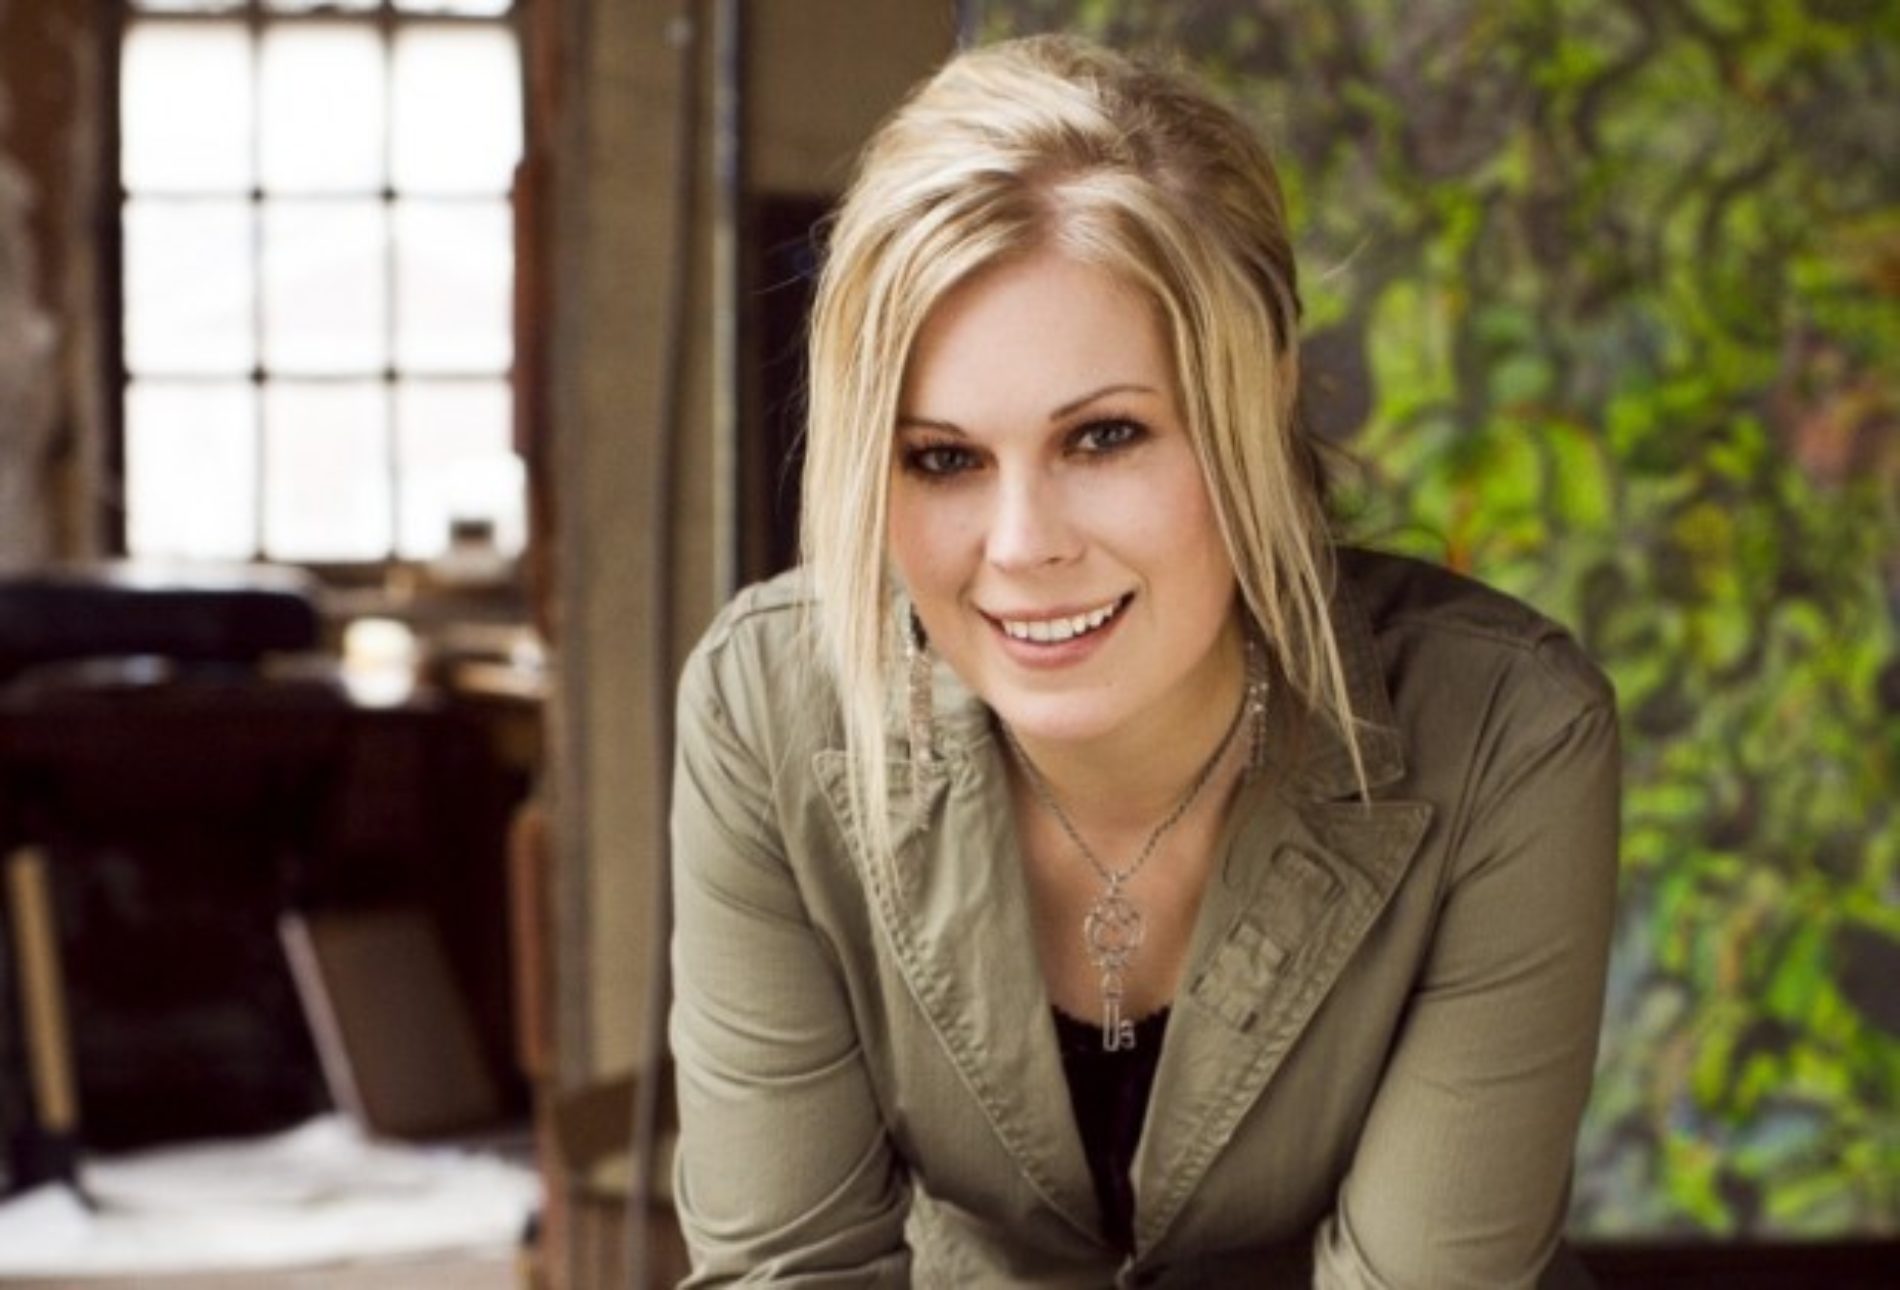 ‘I’m gay. God loves me just the way I am.’ – Christian rock-star Vicky Beeching